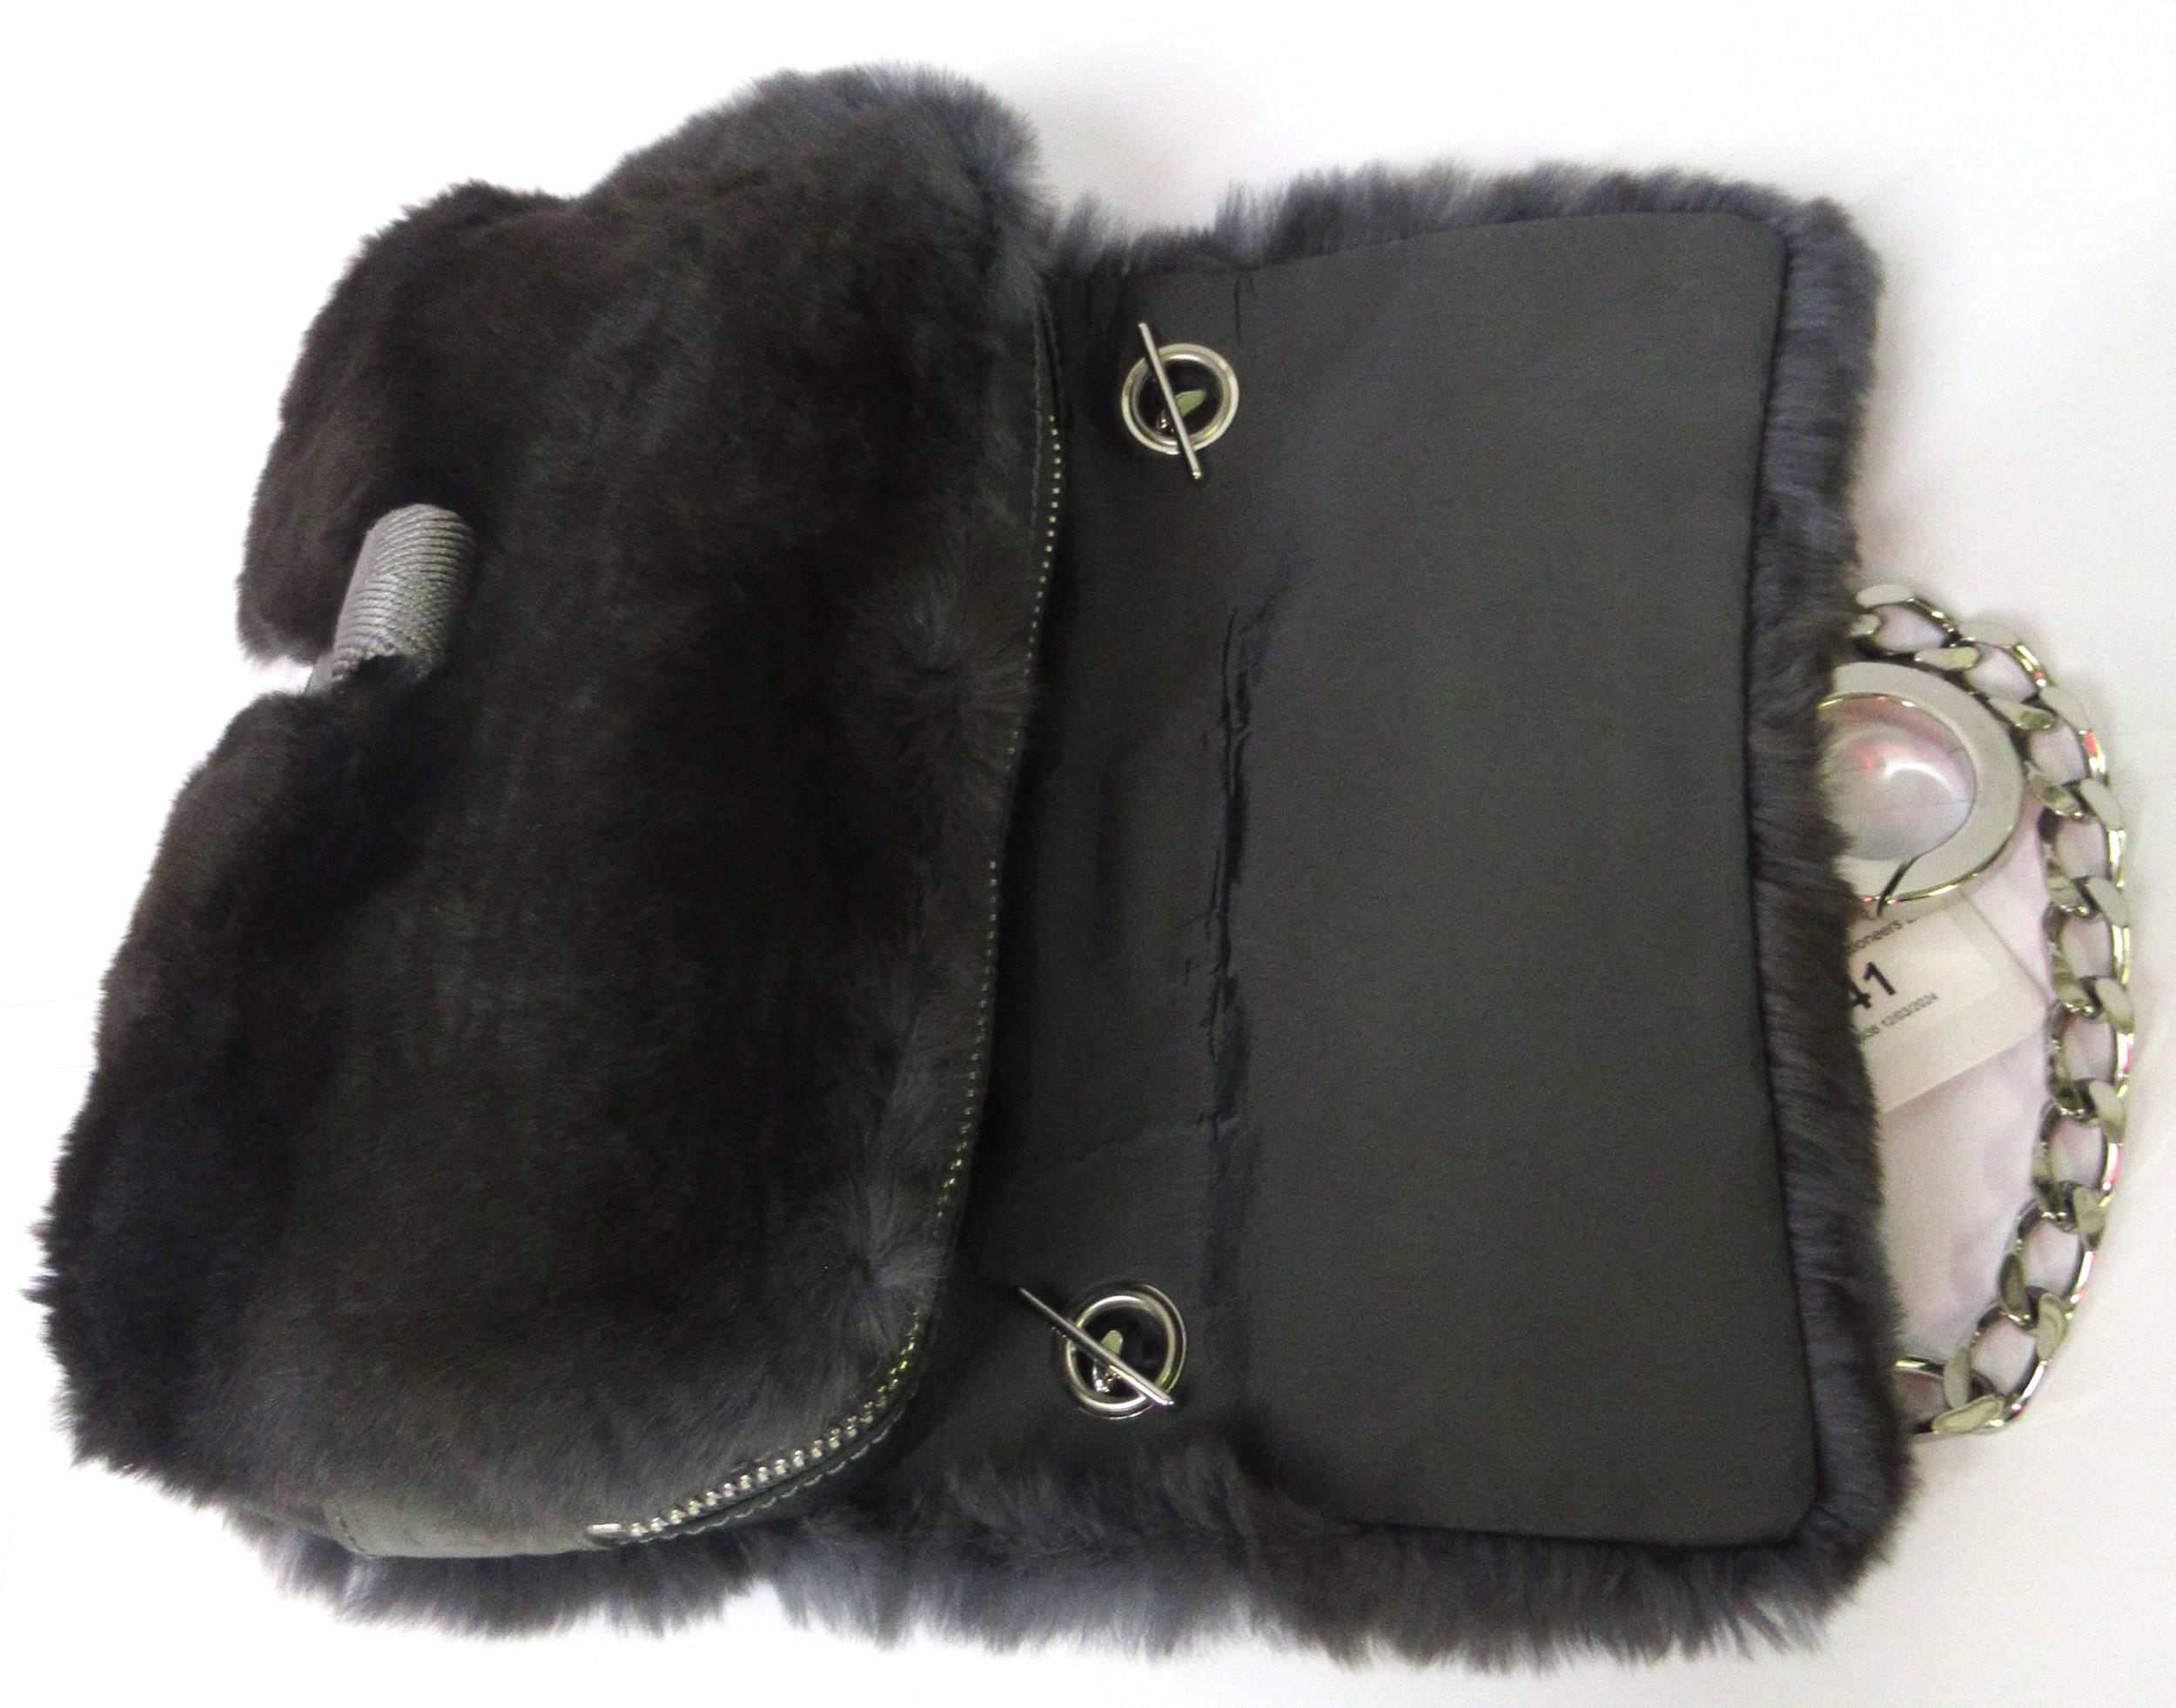 Chanel, 2005 / 2006 Limited Edition rabbit fur classic flap shoulder bag with silver tone hardware - Image 5 of 8